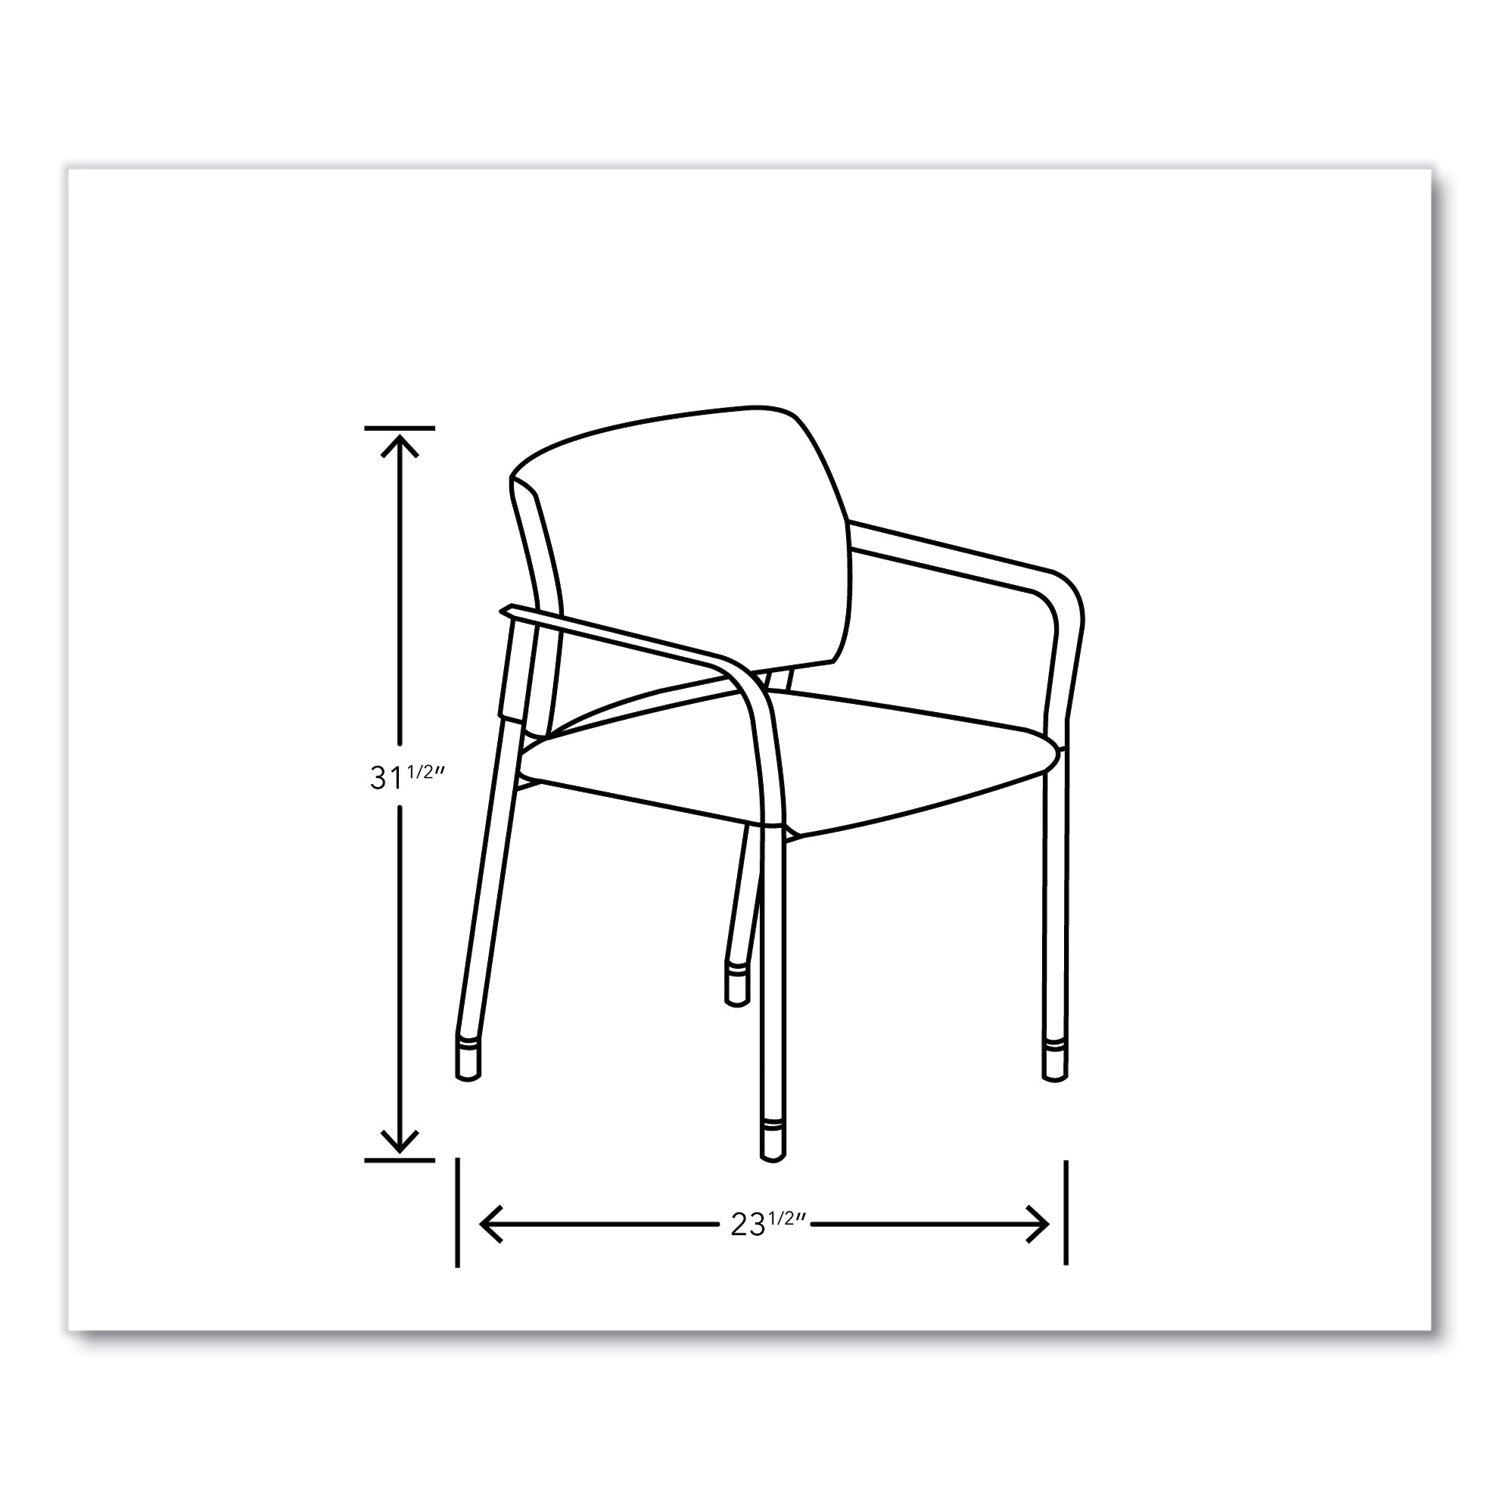 accommodate-series-guest-chair-with-arms-vinyl-upholstery-235-x-2225-x-32-elysian-seat-back-charblack-legs-2-carton_honsgs6fbsx04cb - 3